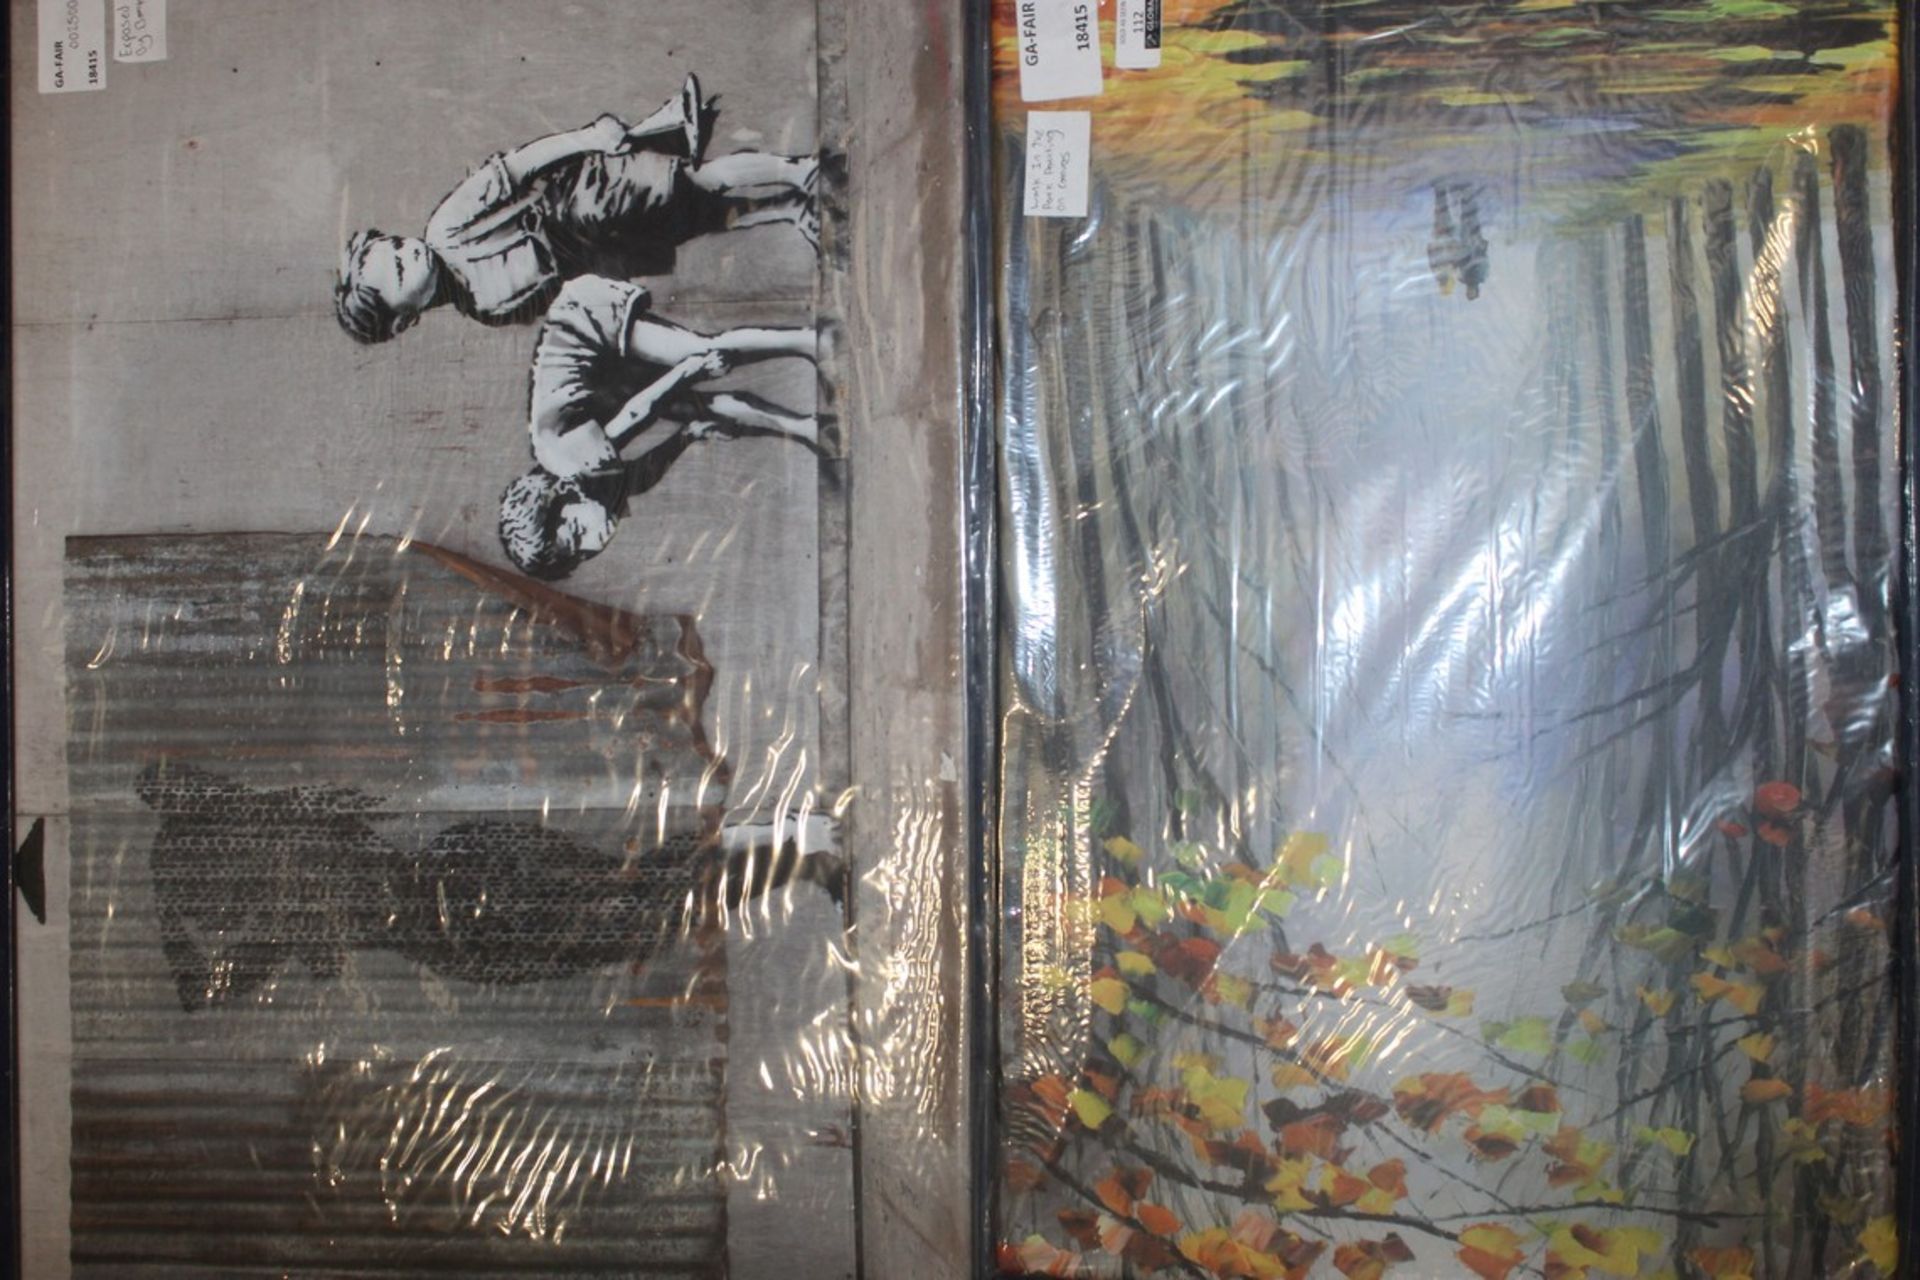 Lot To Include 2 Items To Include Walk In The Park Painting On Canvas & Exposed Kids By Banksy